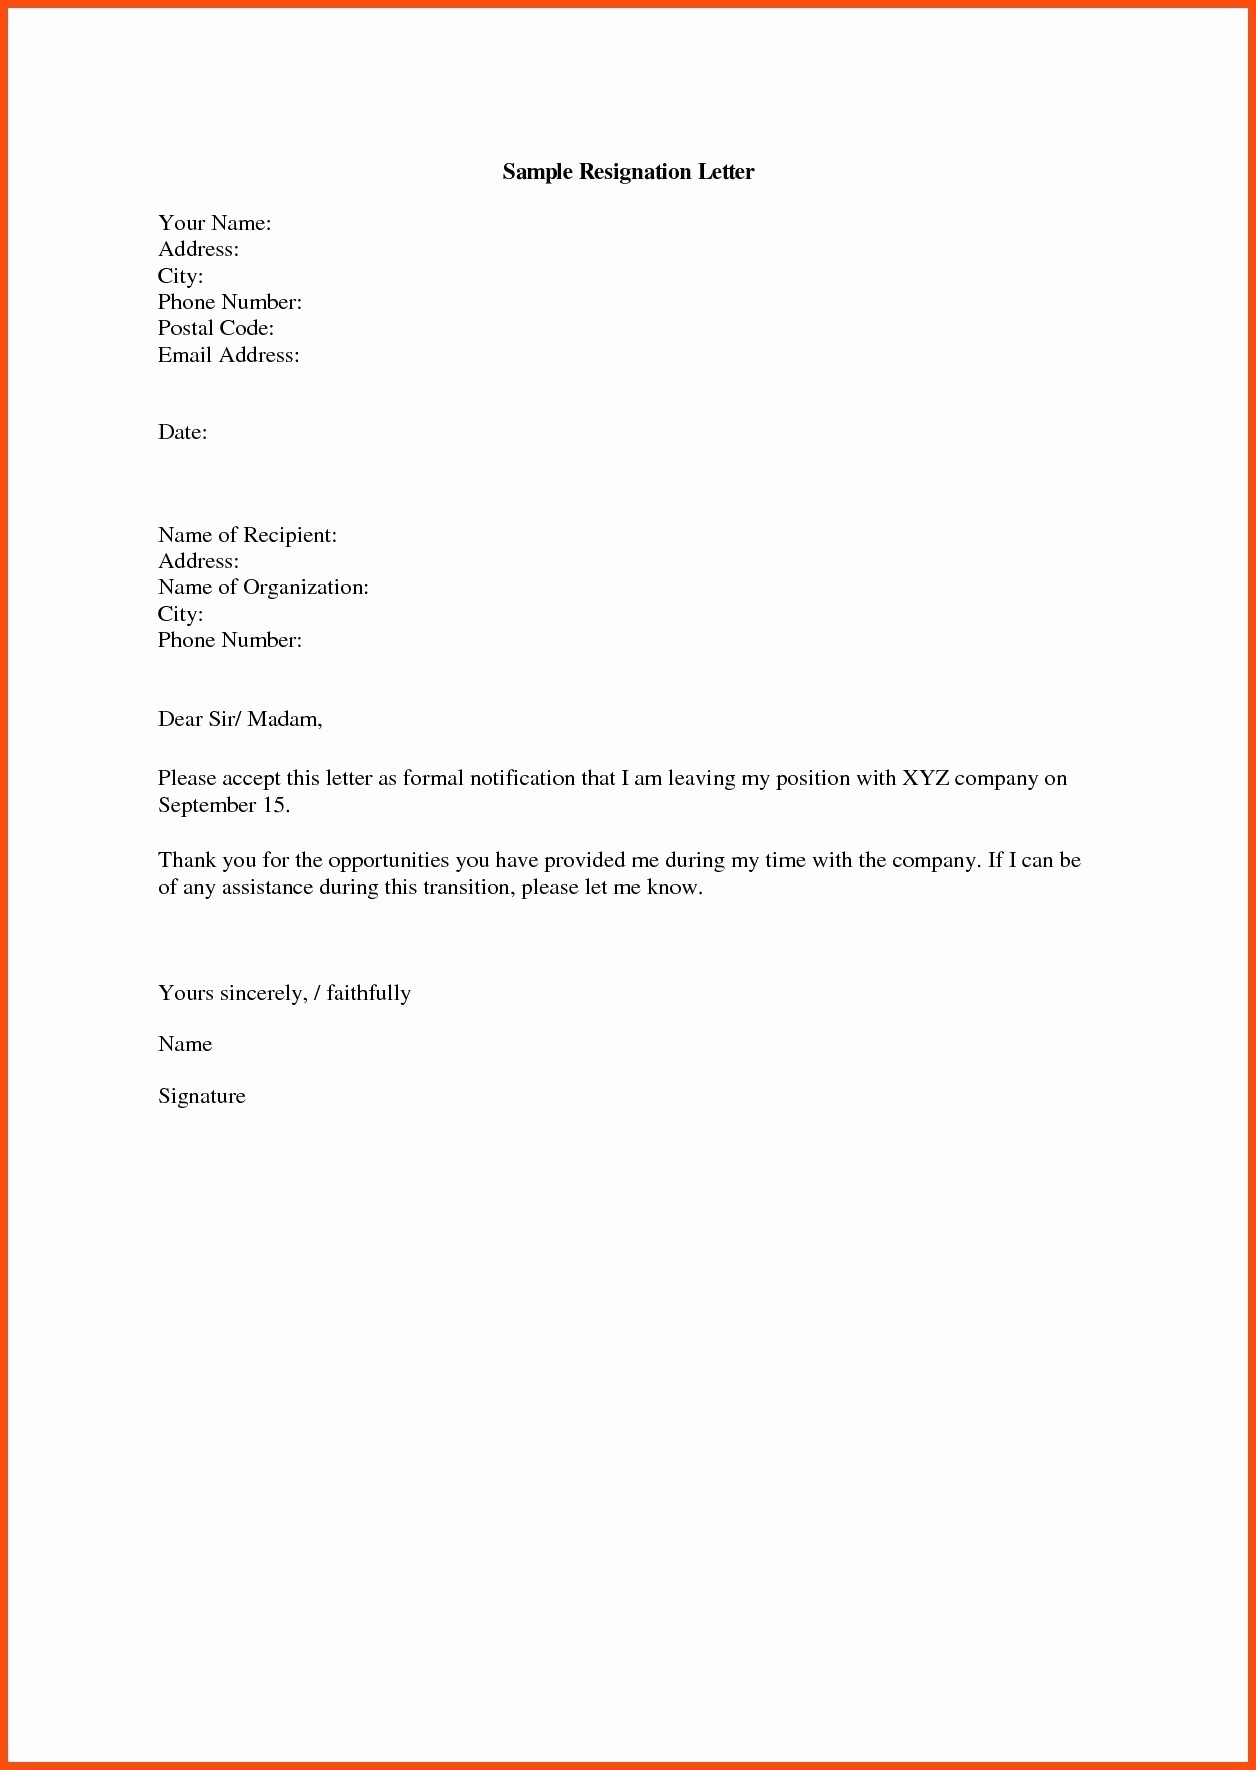 Format A Letter In Word Fresh Resignation Letter format In Microsoft Word Fresh Letter